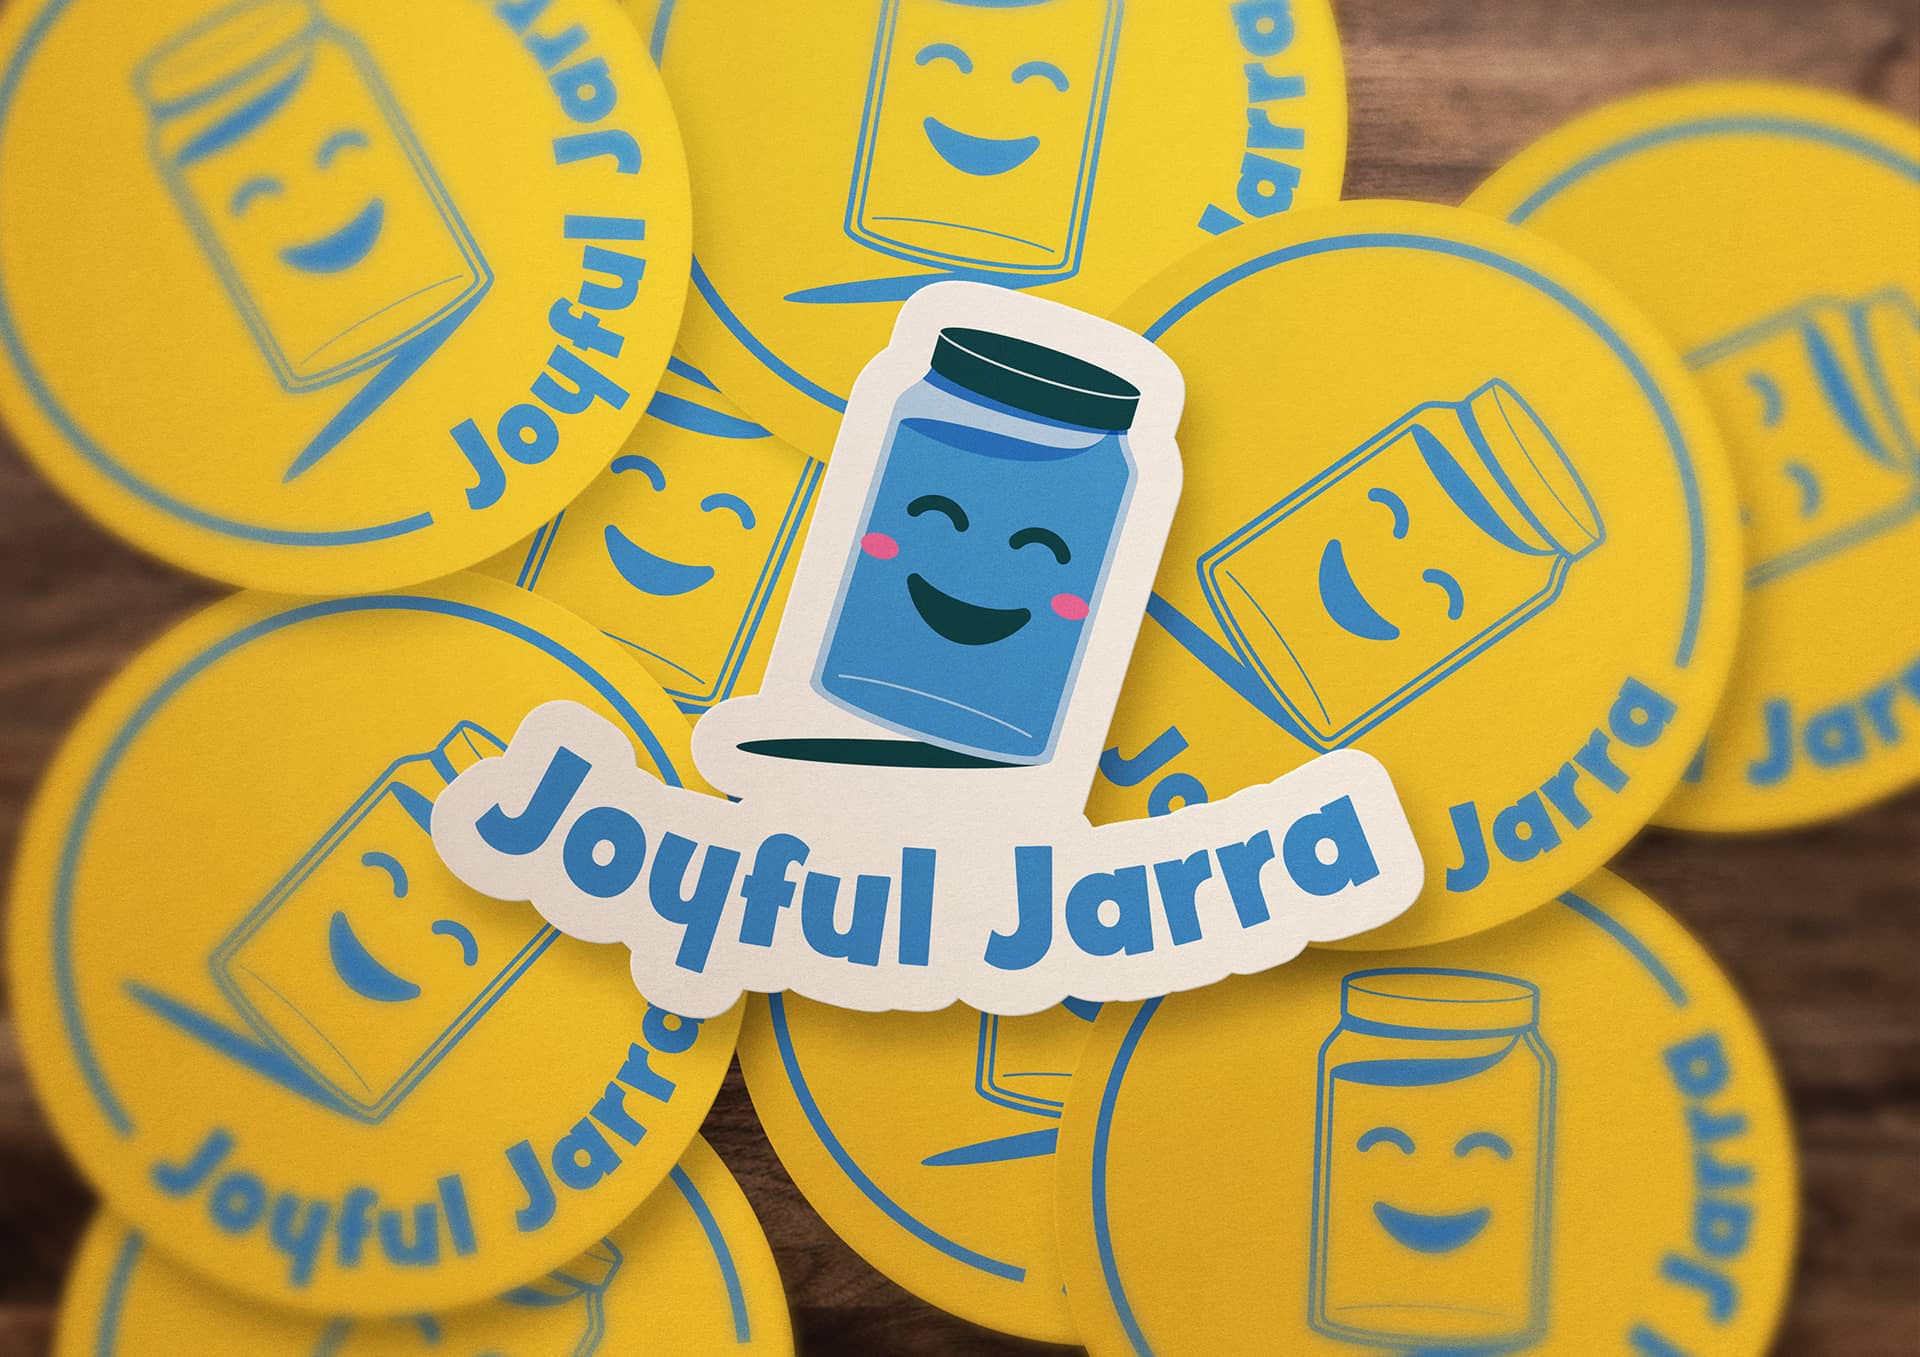 Visual brand identity design created for Joyful Jarra by Olive Ridley Studios - logos shown mocked up as printed stickers